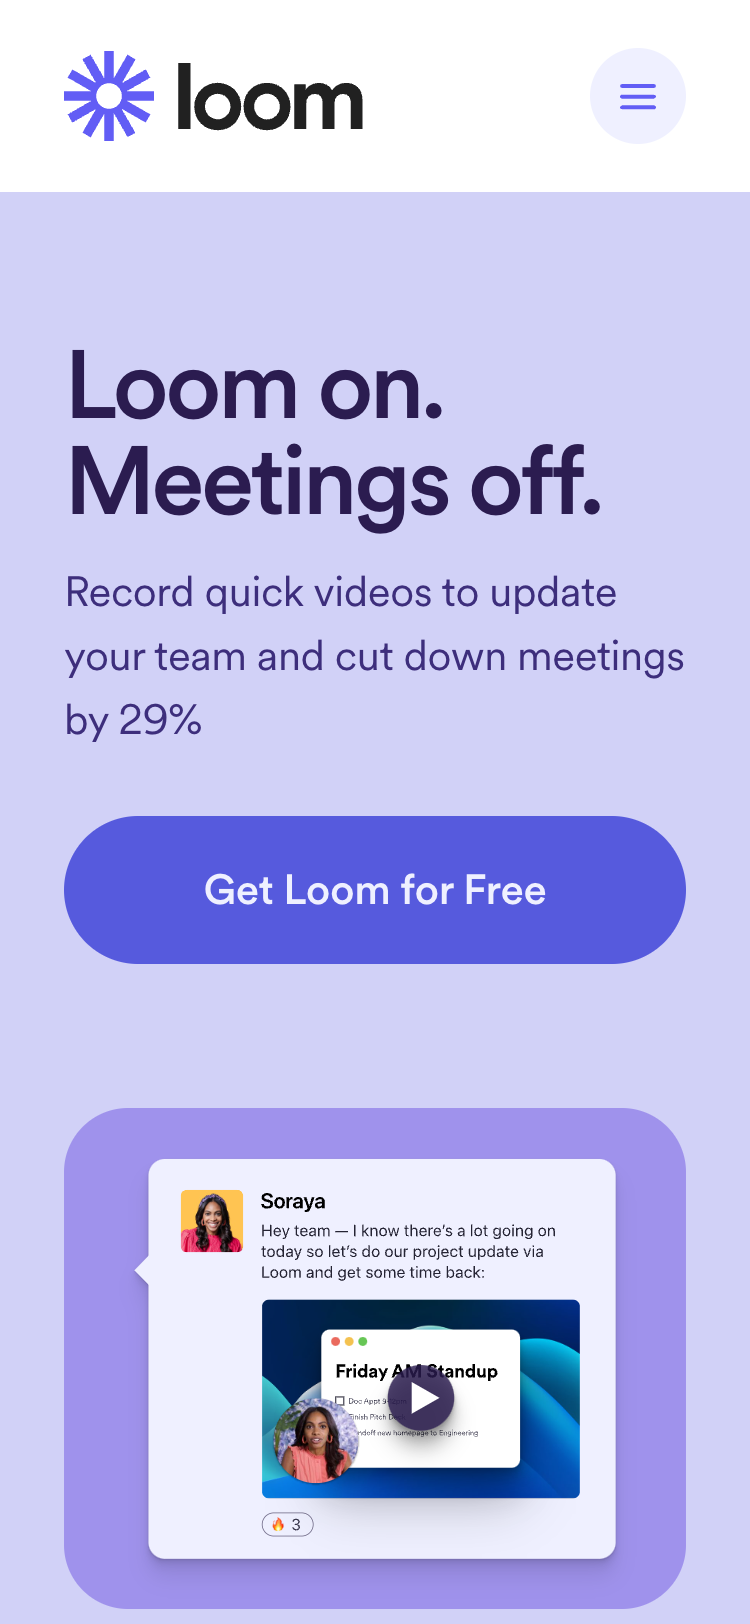 Mobile screenshot of the Loom home page. The header contains the Loom logo and a menu button. The hero has a large 'Get Loom for Free' button followed by a screenshot of the Loom app.